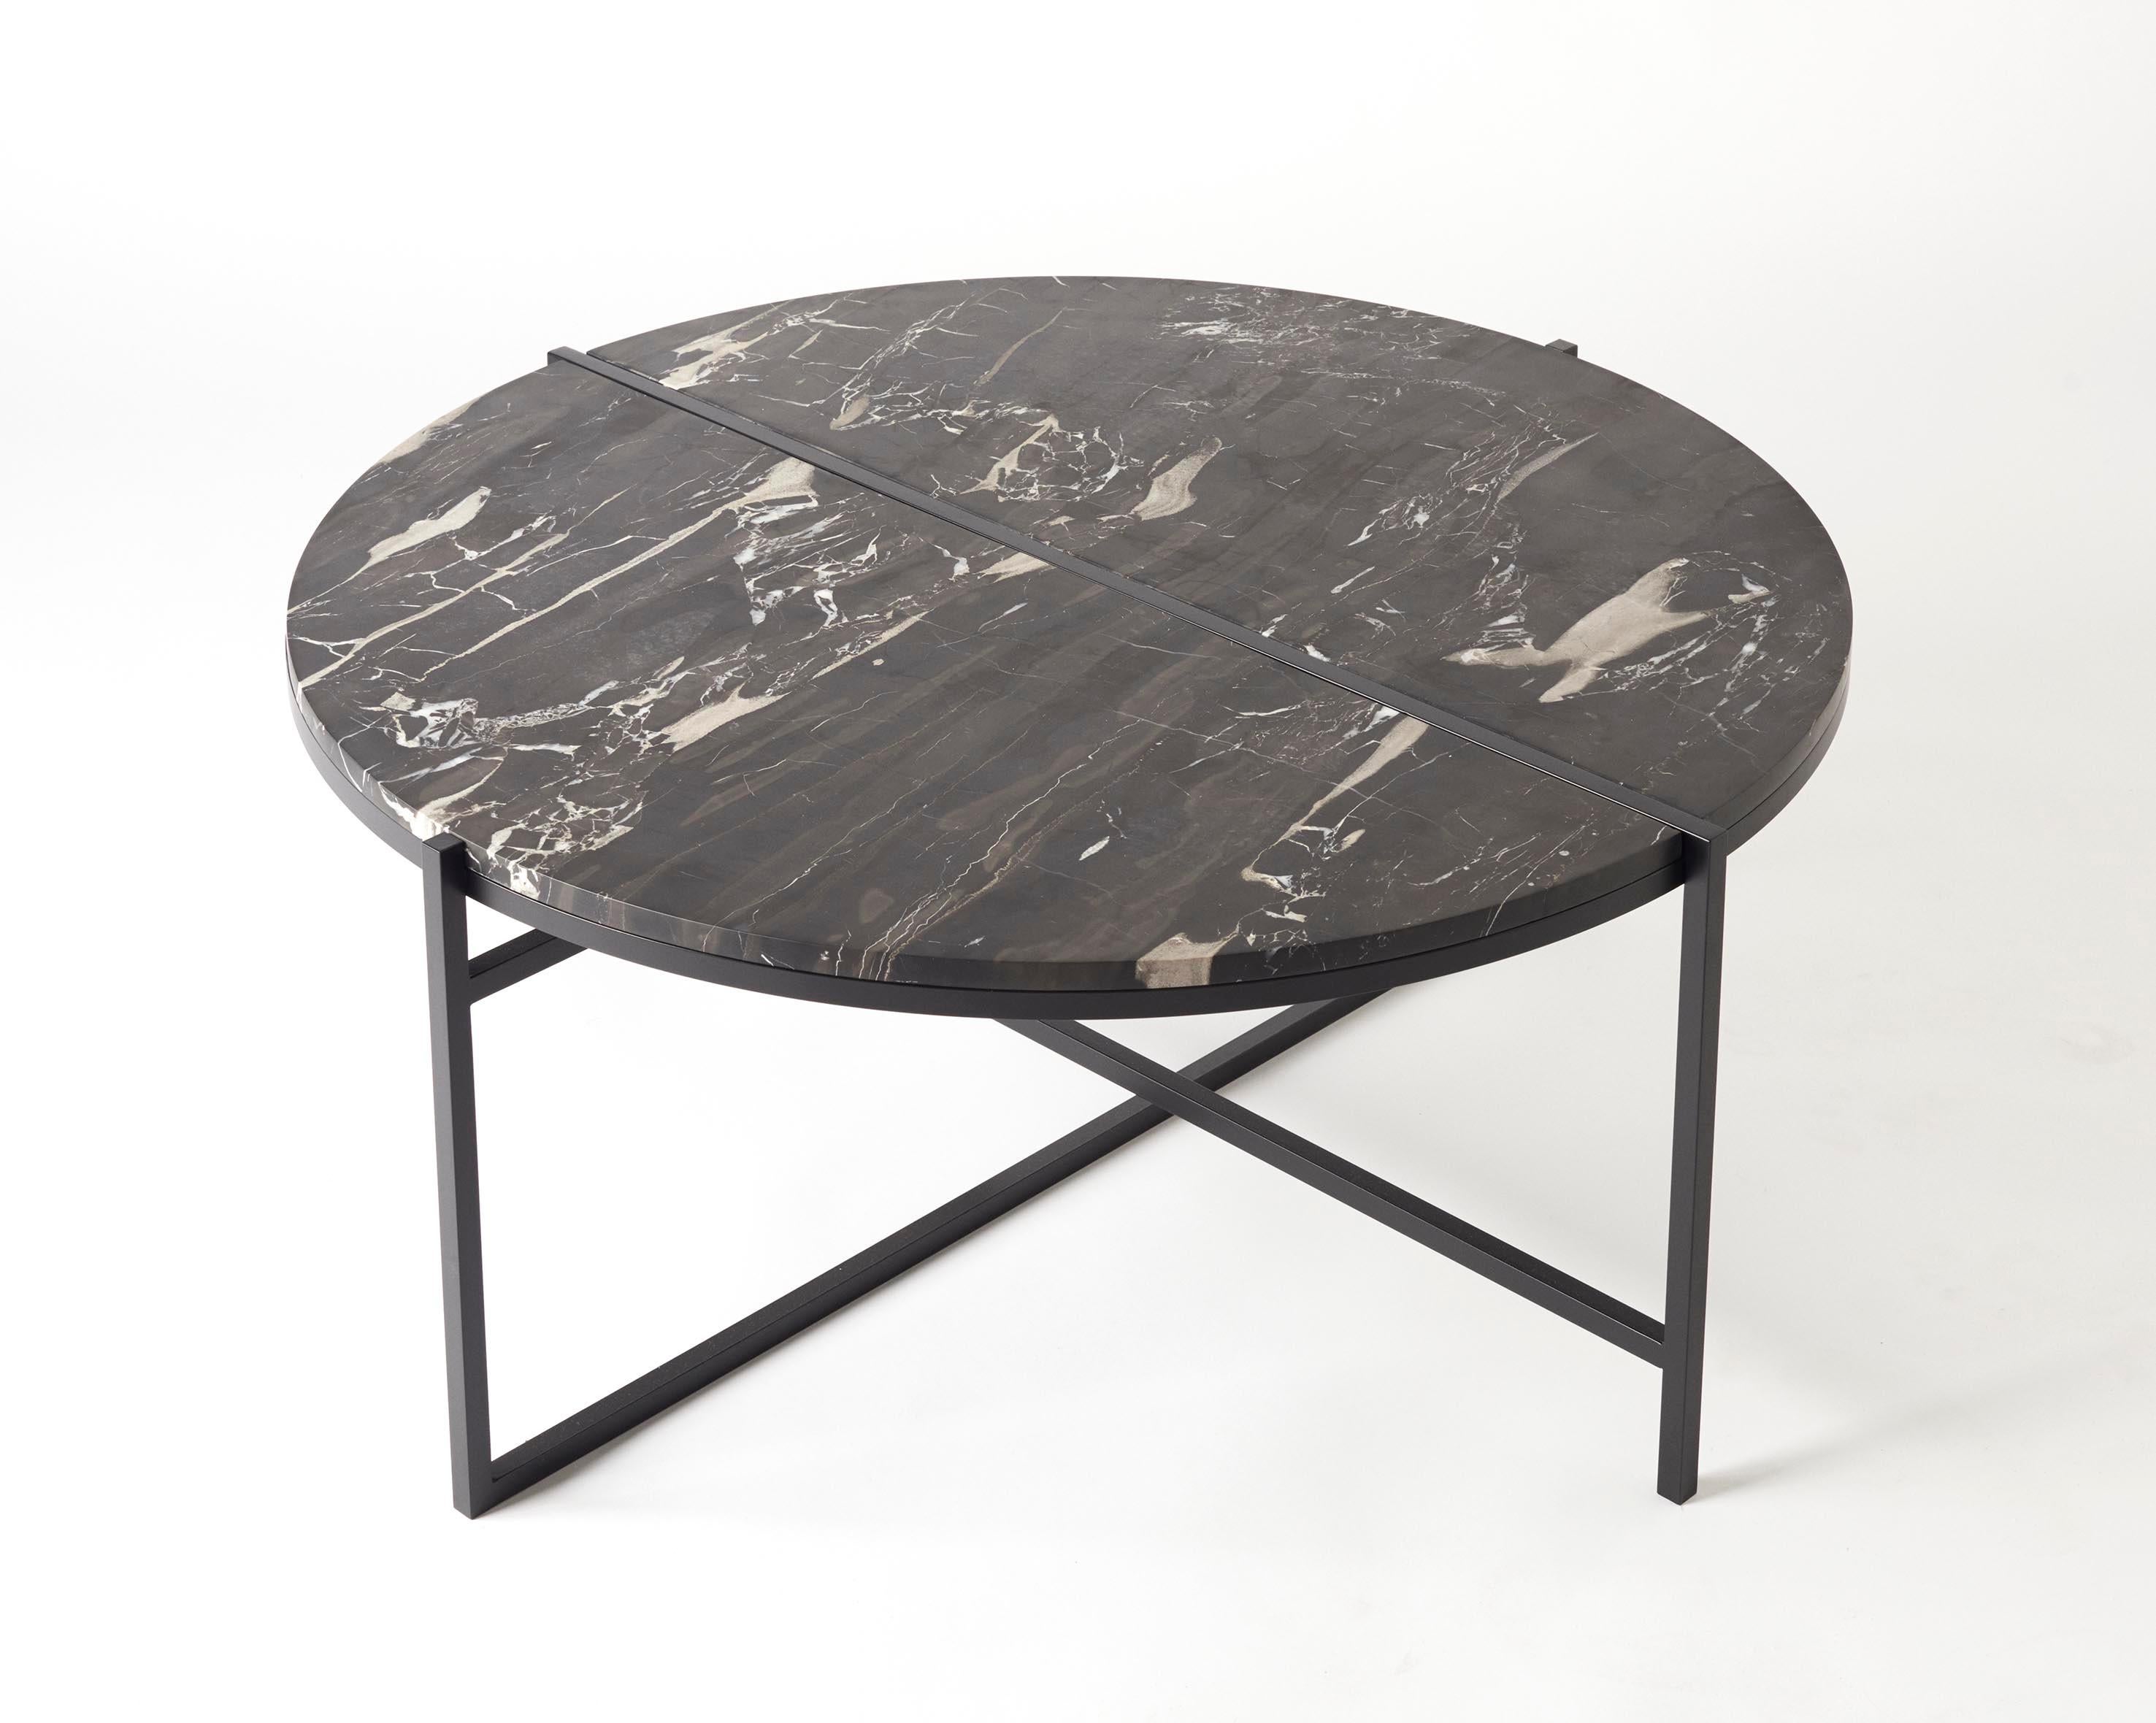 Polished Contemporary Coffee Table, Silver Black Marble, Minimalist, Modern, Unique For Sale